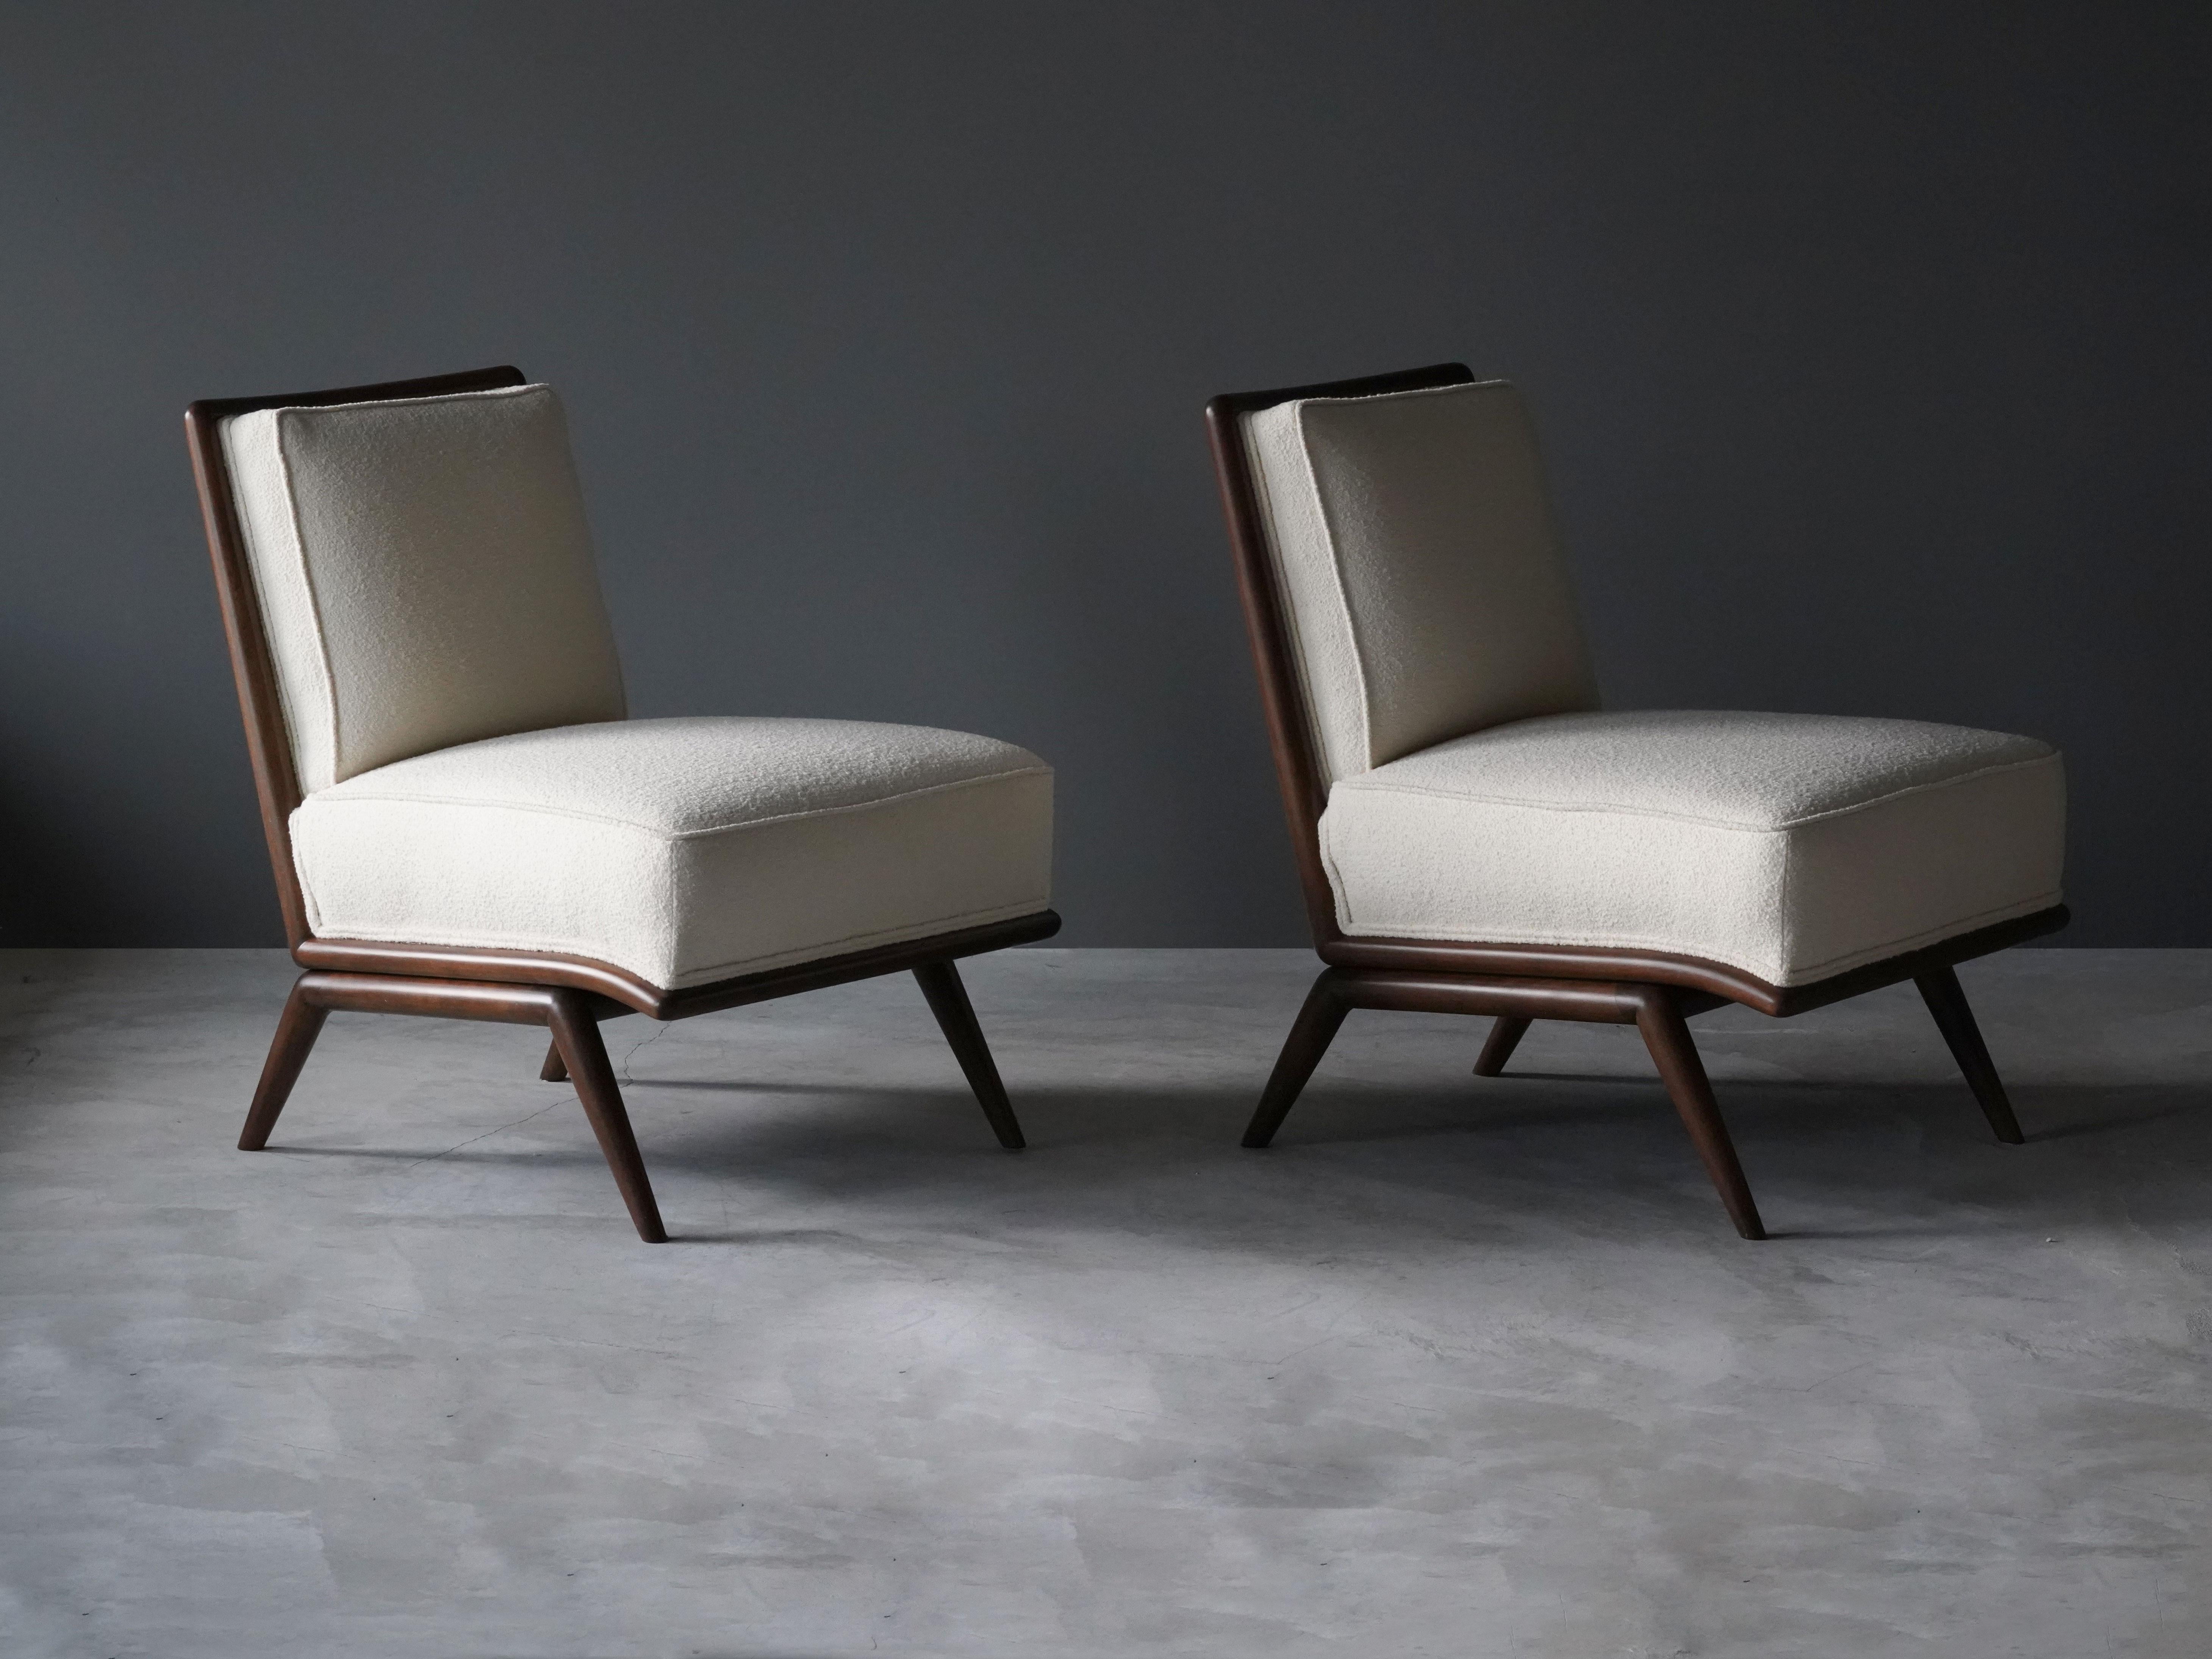 A pair of rare slipper chairs designed by T.H. Robsjohn-Gibbings. Produced by Widdicomb Furniture Company in Grand Rapids, Michigan, circa 1950s.

The curvlinear form gives this Robsjohn-Gibbings design a Modern expression. 

